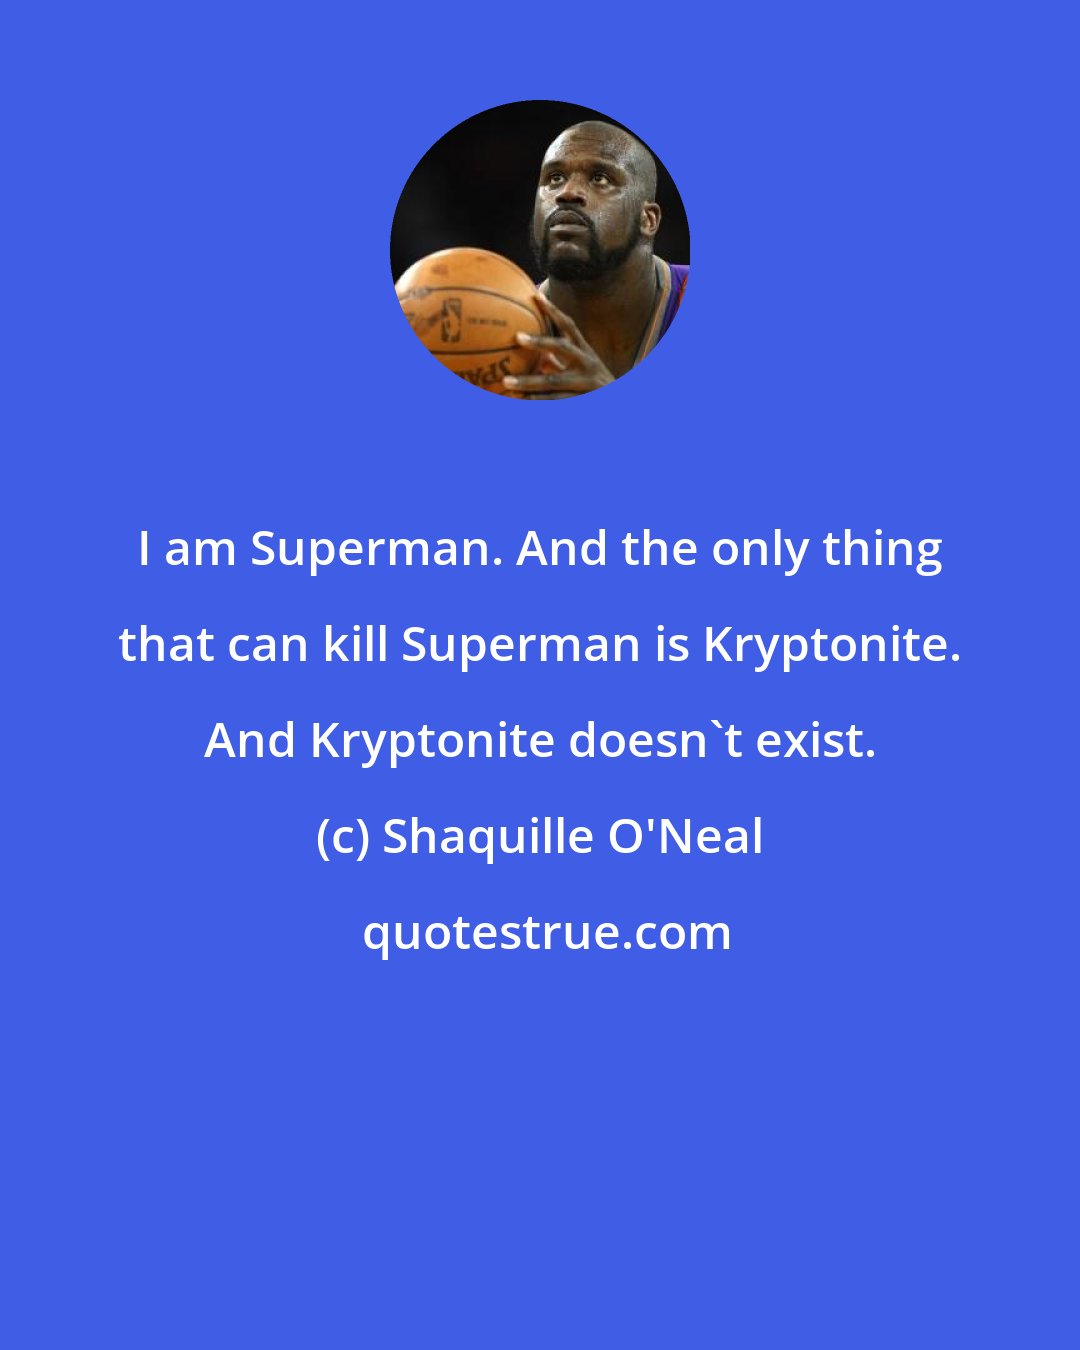 Shaquille O'Neal: I am Superman. And the only thing that can kill Superman is Kryptonite. And Kryptonite doesn't exist.